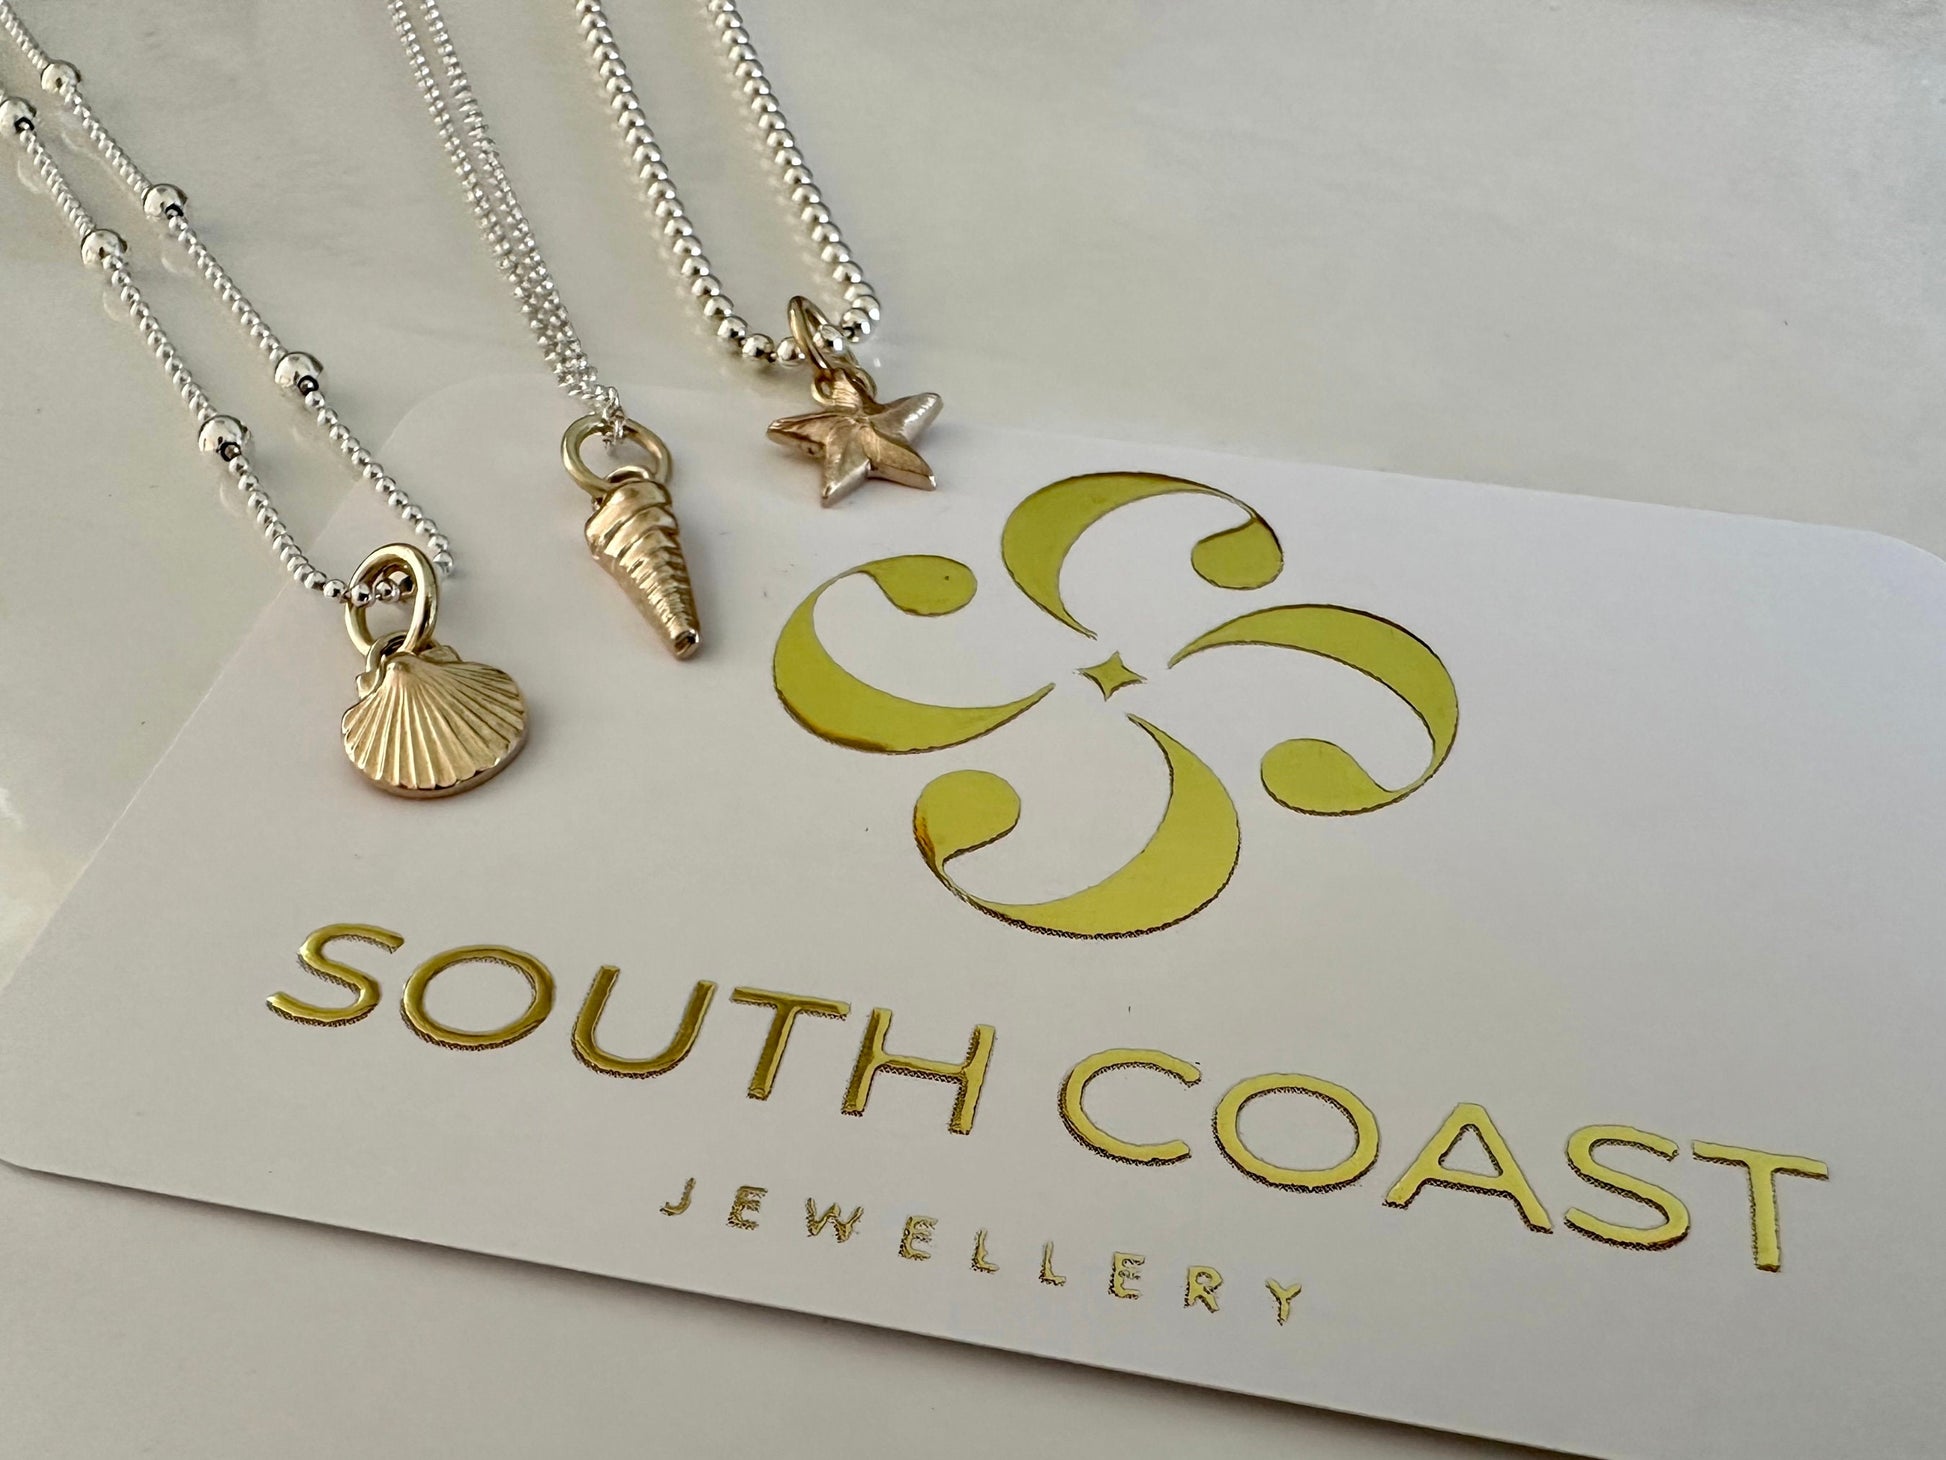 Hallmarked solid 9ct gold Turritella Seashell pendant charm necklace, handmade from recycled 9ct gold, Ready to ship